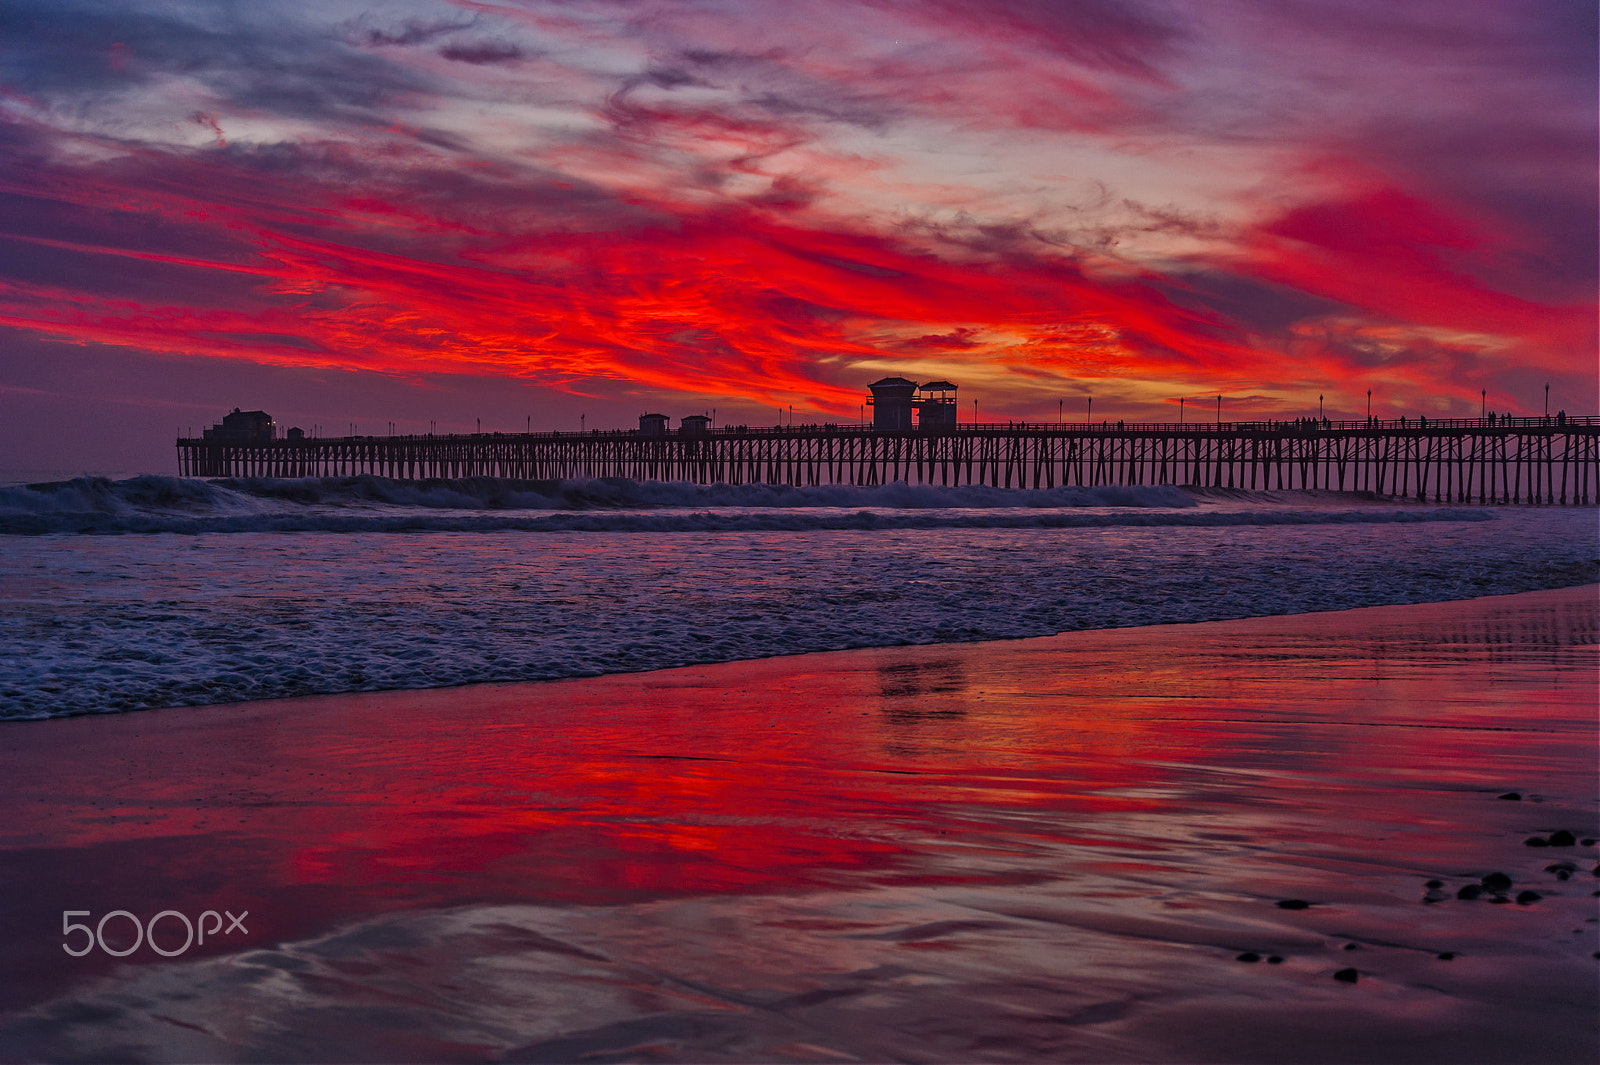 Nikon D700 sample photo. Fiery sunset at the oceanside pier - march 14, 2017 photography